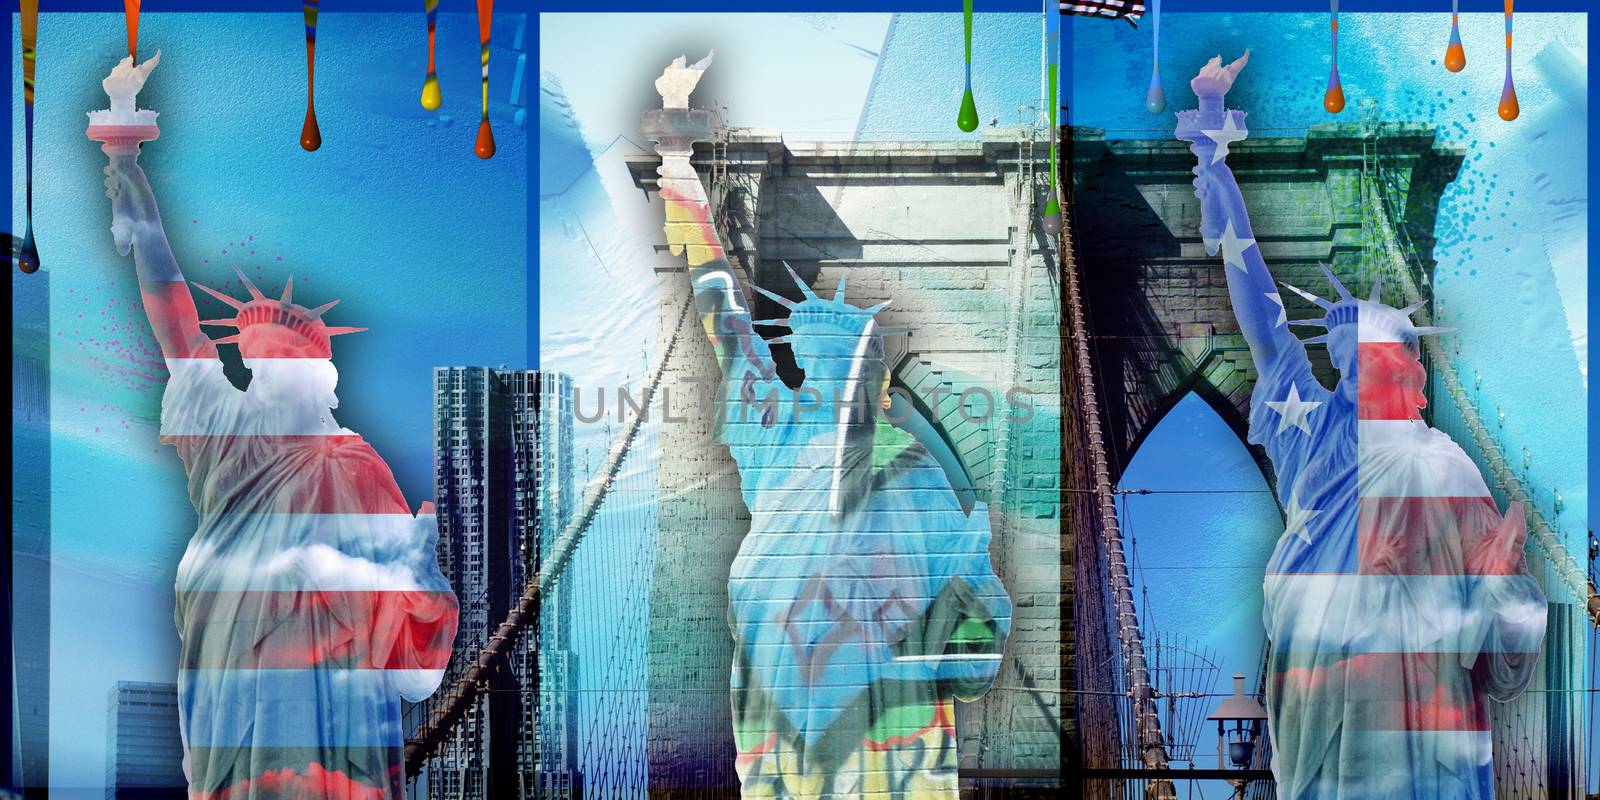 Surreal digital art. Brooklyn bridge and Liberty statue on New York's cityscape. Giant moon, pieces of graffiti and paint drops. 3D rendering